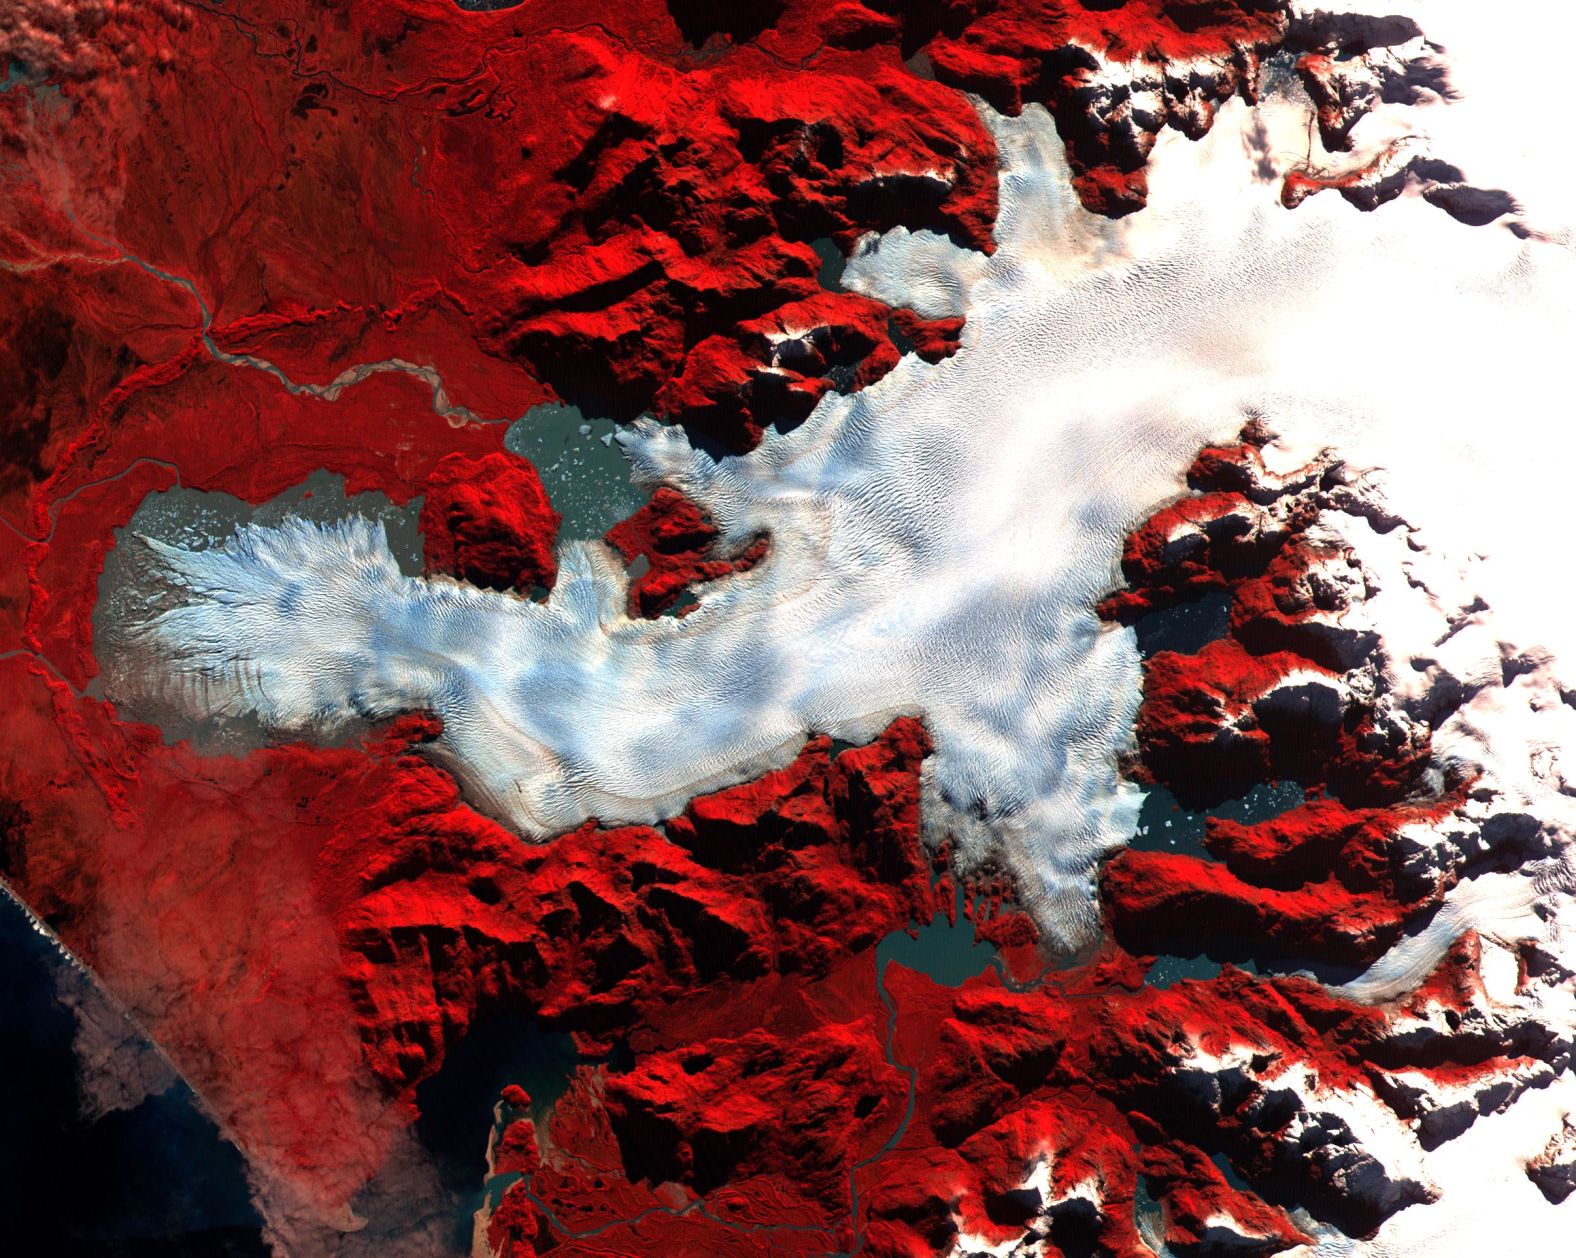 <strong>Patagonia, Chile:</strong> NASA uses ASTER images to monitor shrinking glaciers, as an indicator of global warming. Pictured here, an ice sheet in Northern Patagonia features assigned colors -- with vegetation in red -- to measure the glacier's size over time.  